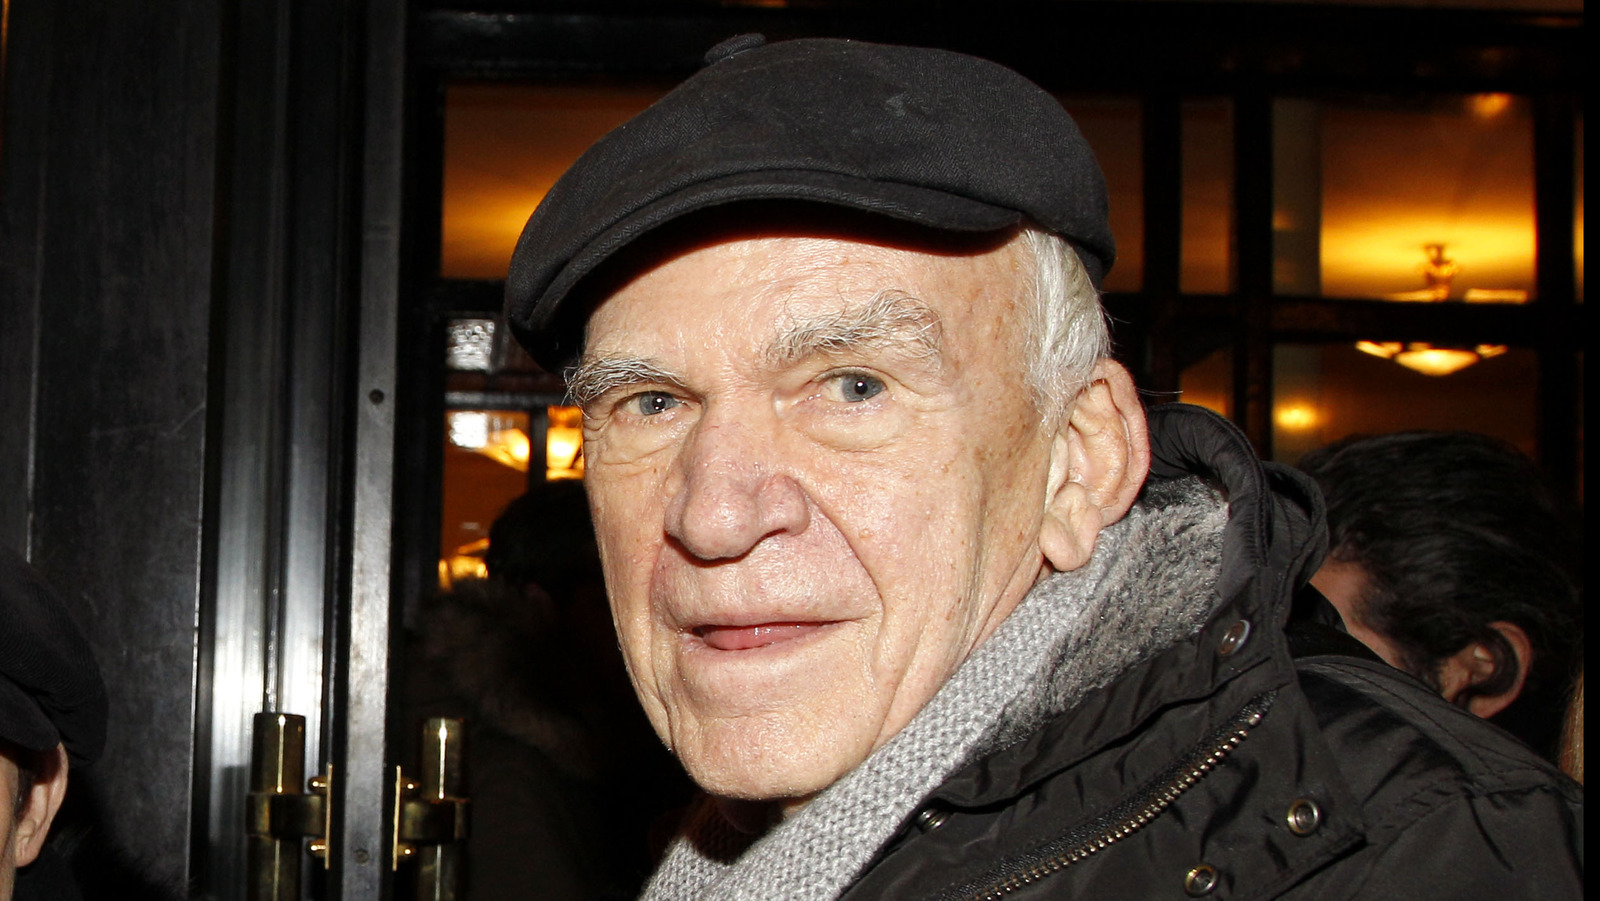 The Reason Milan Kundera Was Given Back His Citizenship After 40 Years